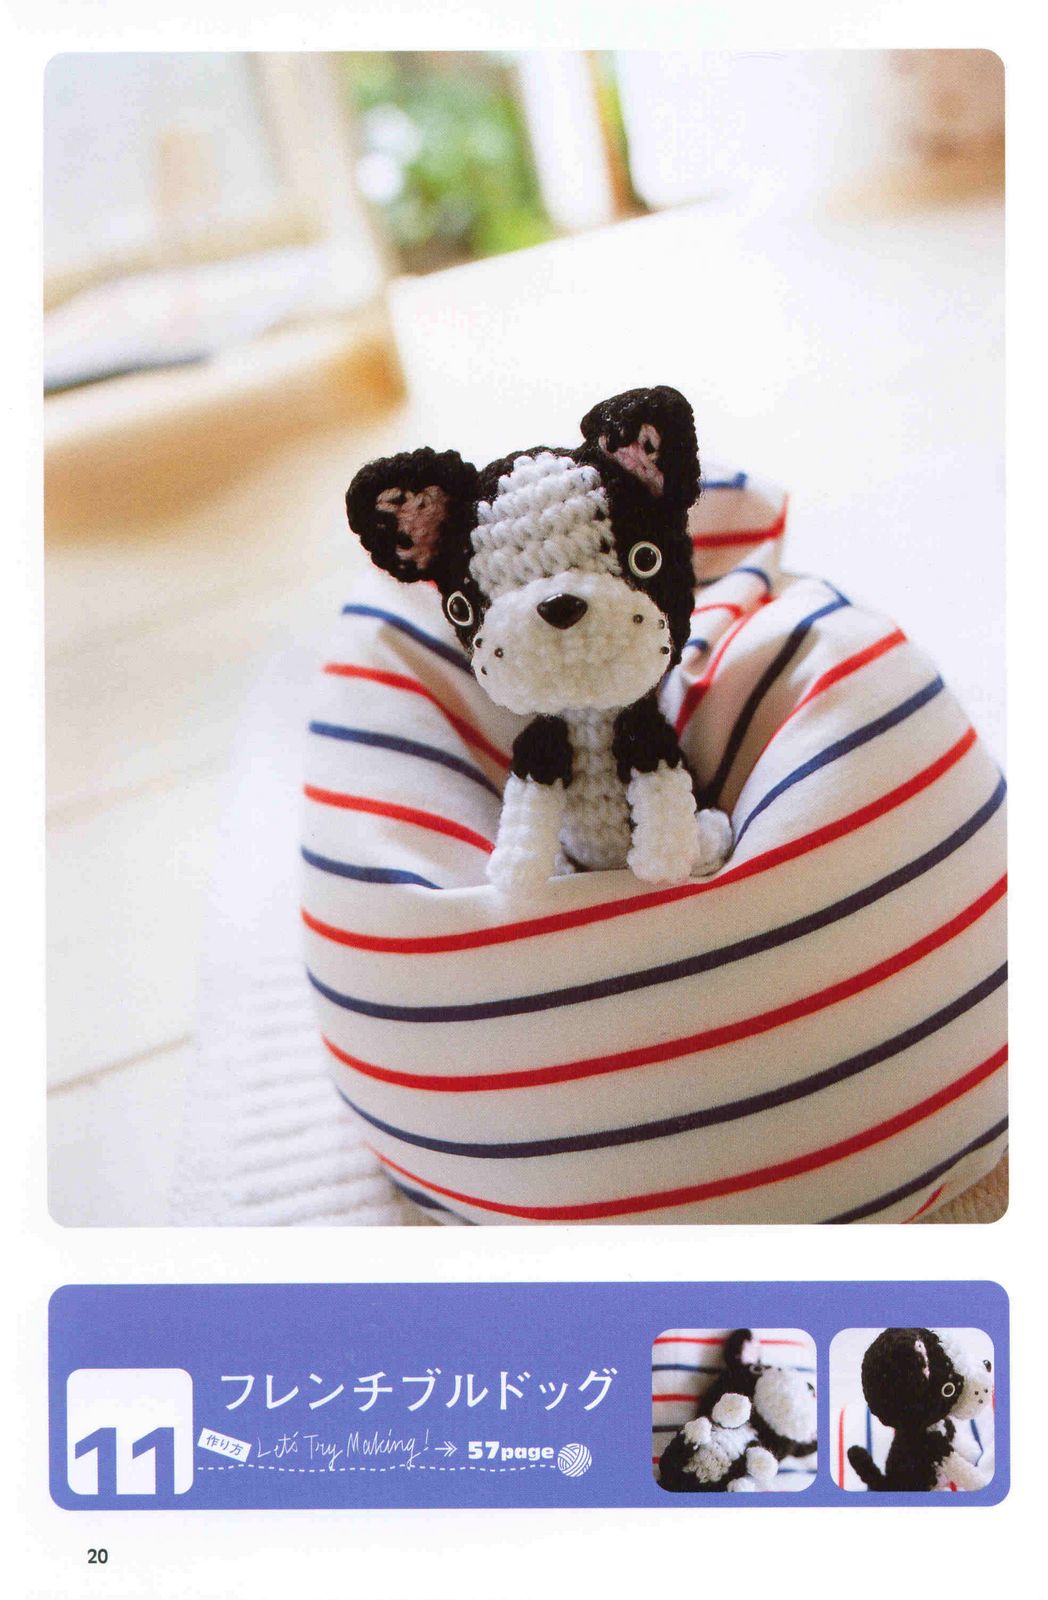 Puppy with the white and black muzzle amigurumi pattern (1)